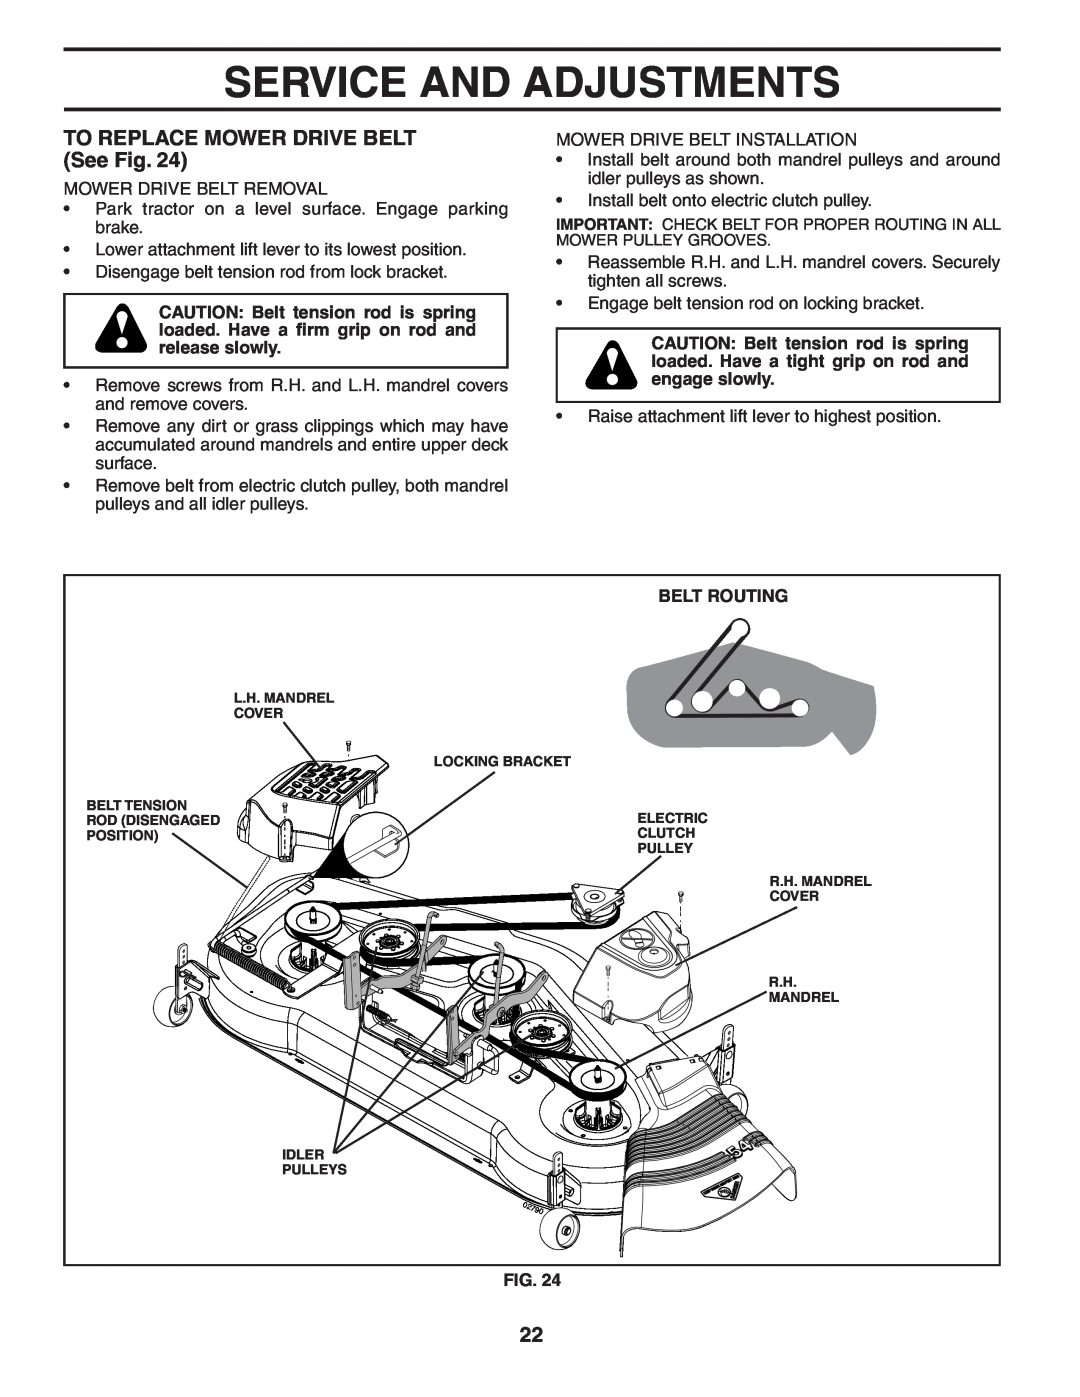 Poulan 194604 manual TO REPLACE MOWER DRIVE BELT See Fig, Service And Adjustments 